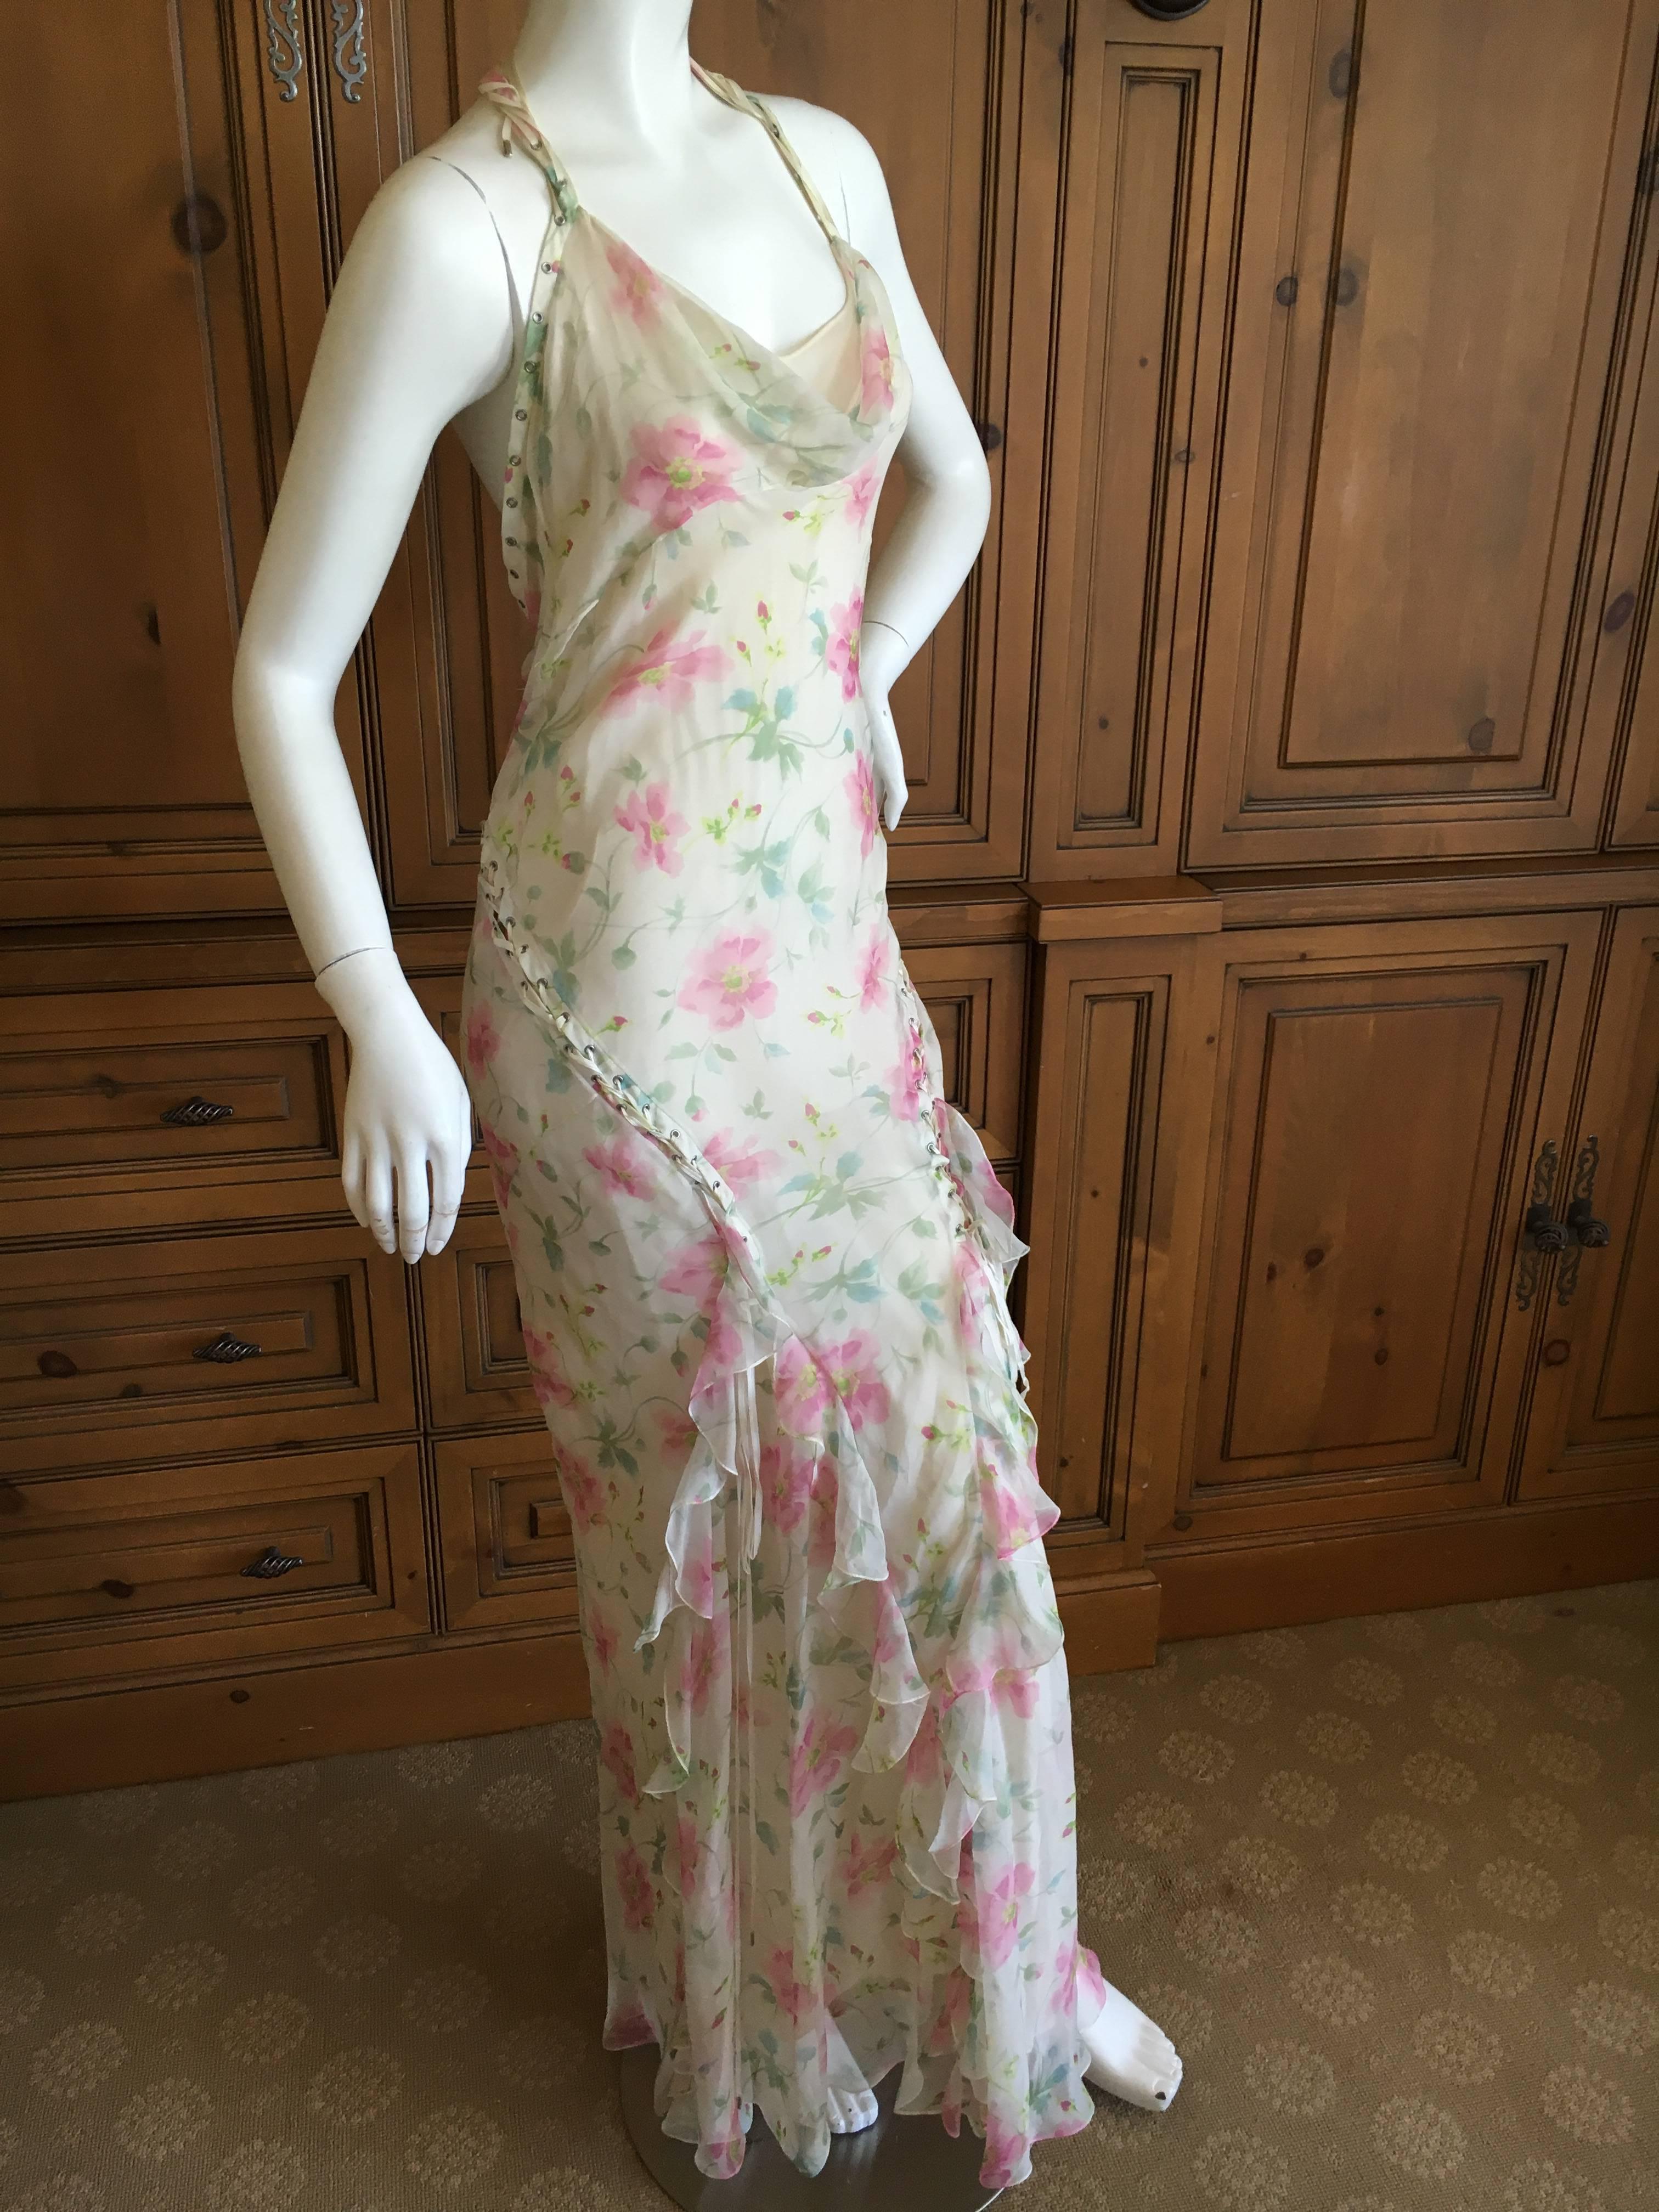 Women's Dior by Galliano Sweet Ruffled Silk Floral Dress with Corset Lace Details